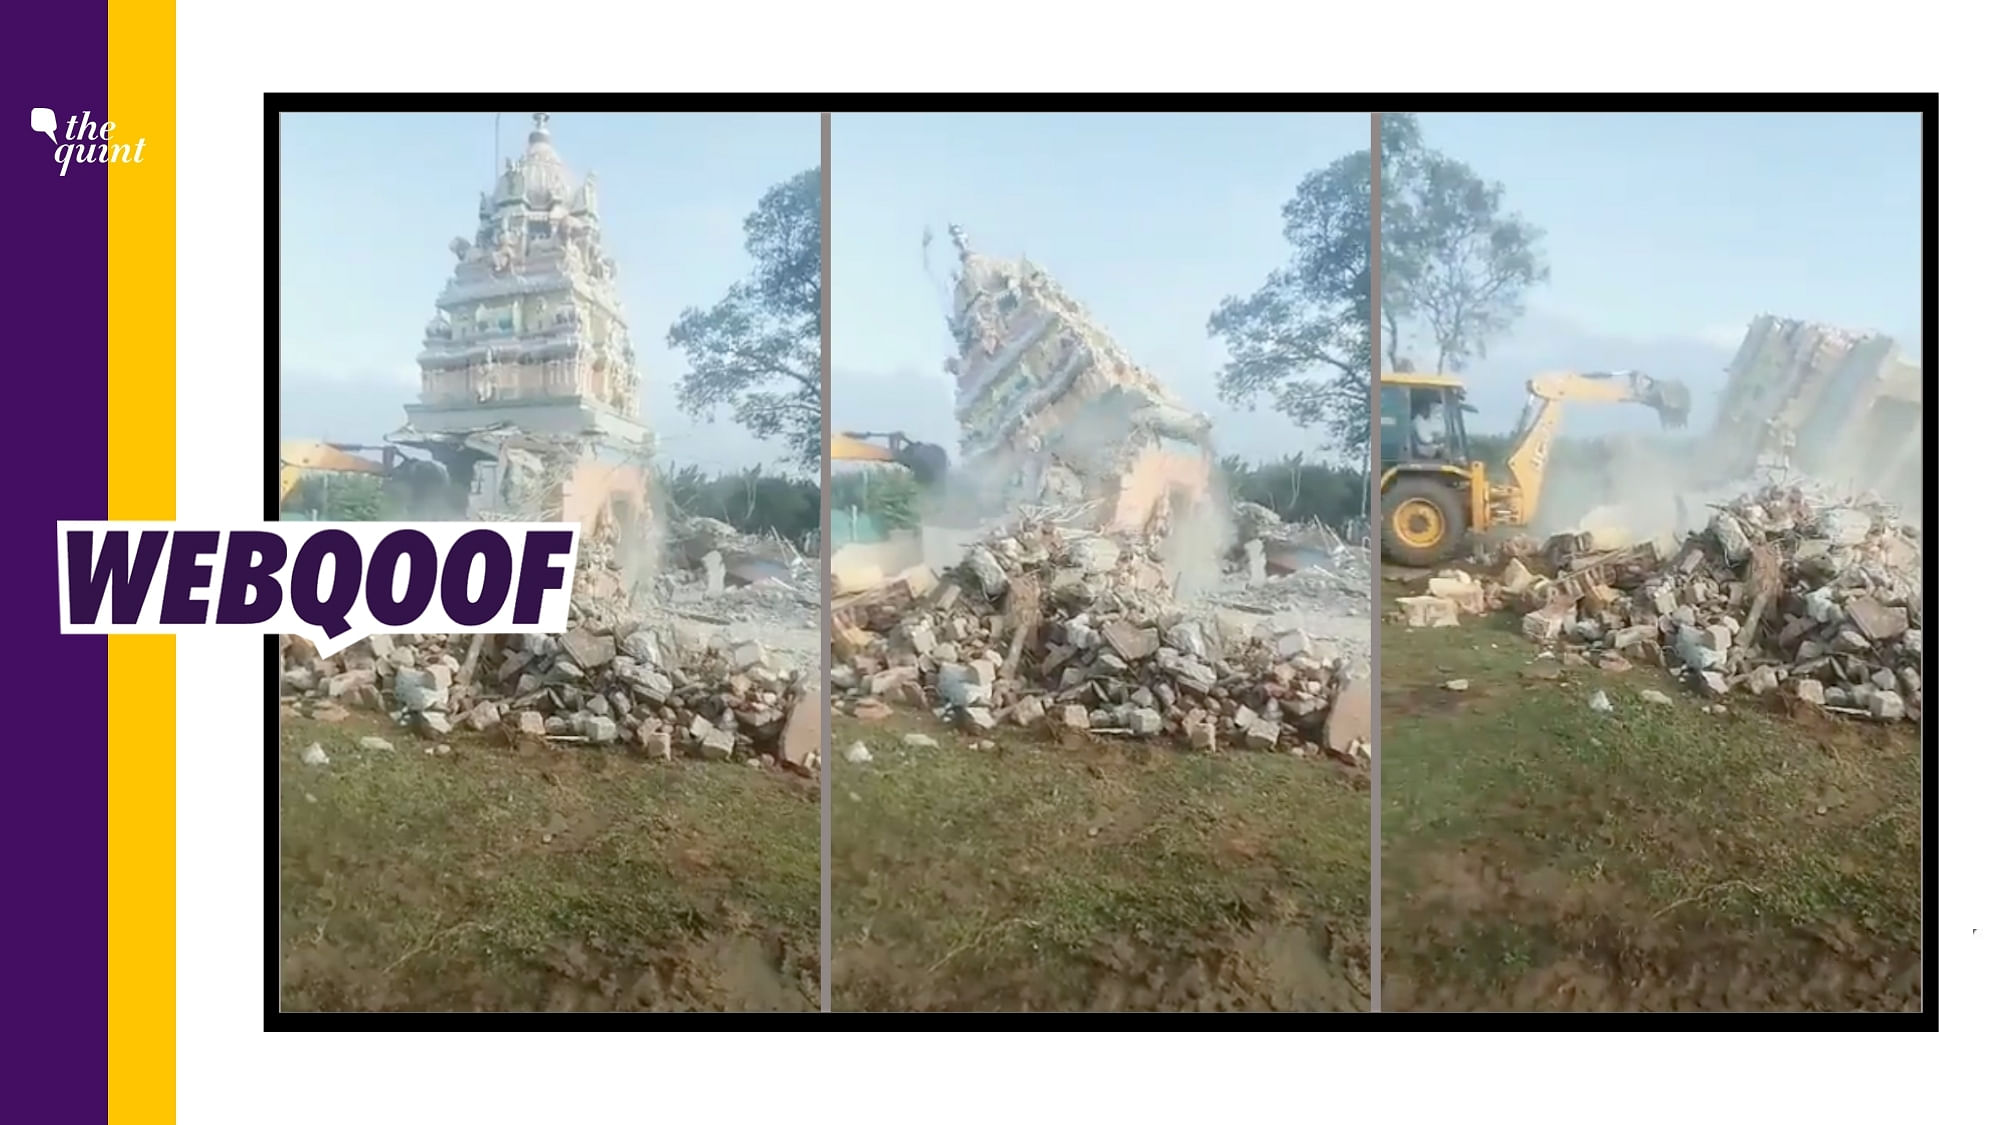 <div class="paragraphs"><p>The video claims that it shows a temple being demolished in Tamil Nadu.&nbsp;</p></div>